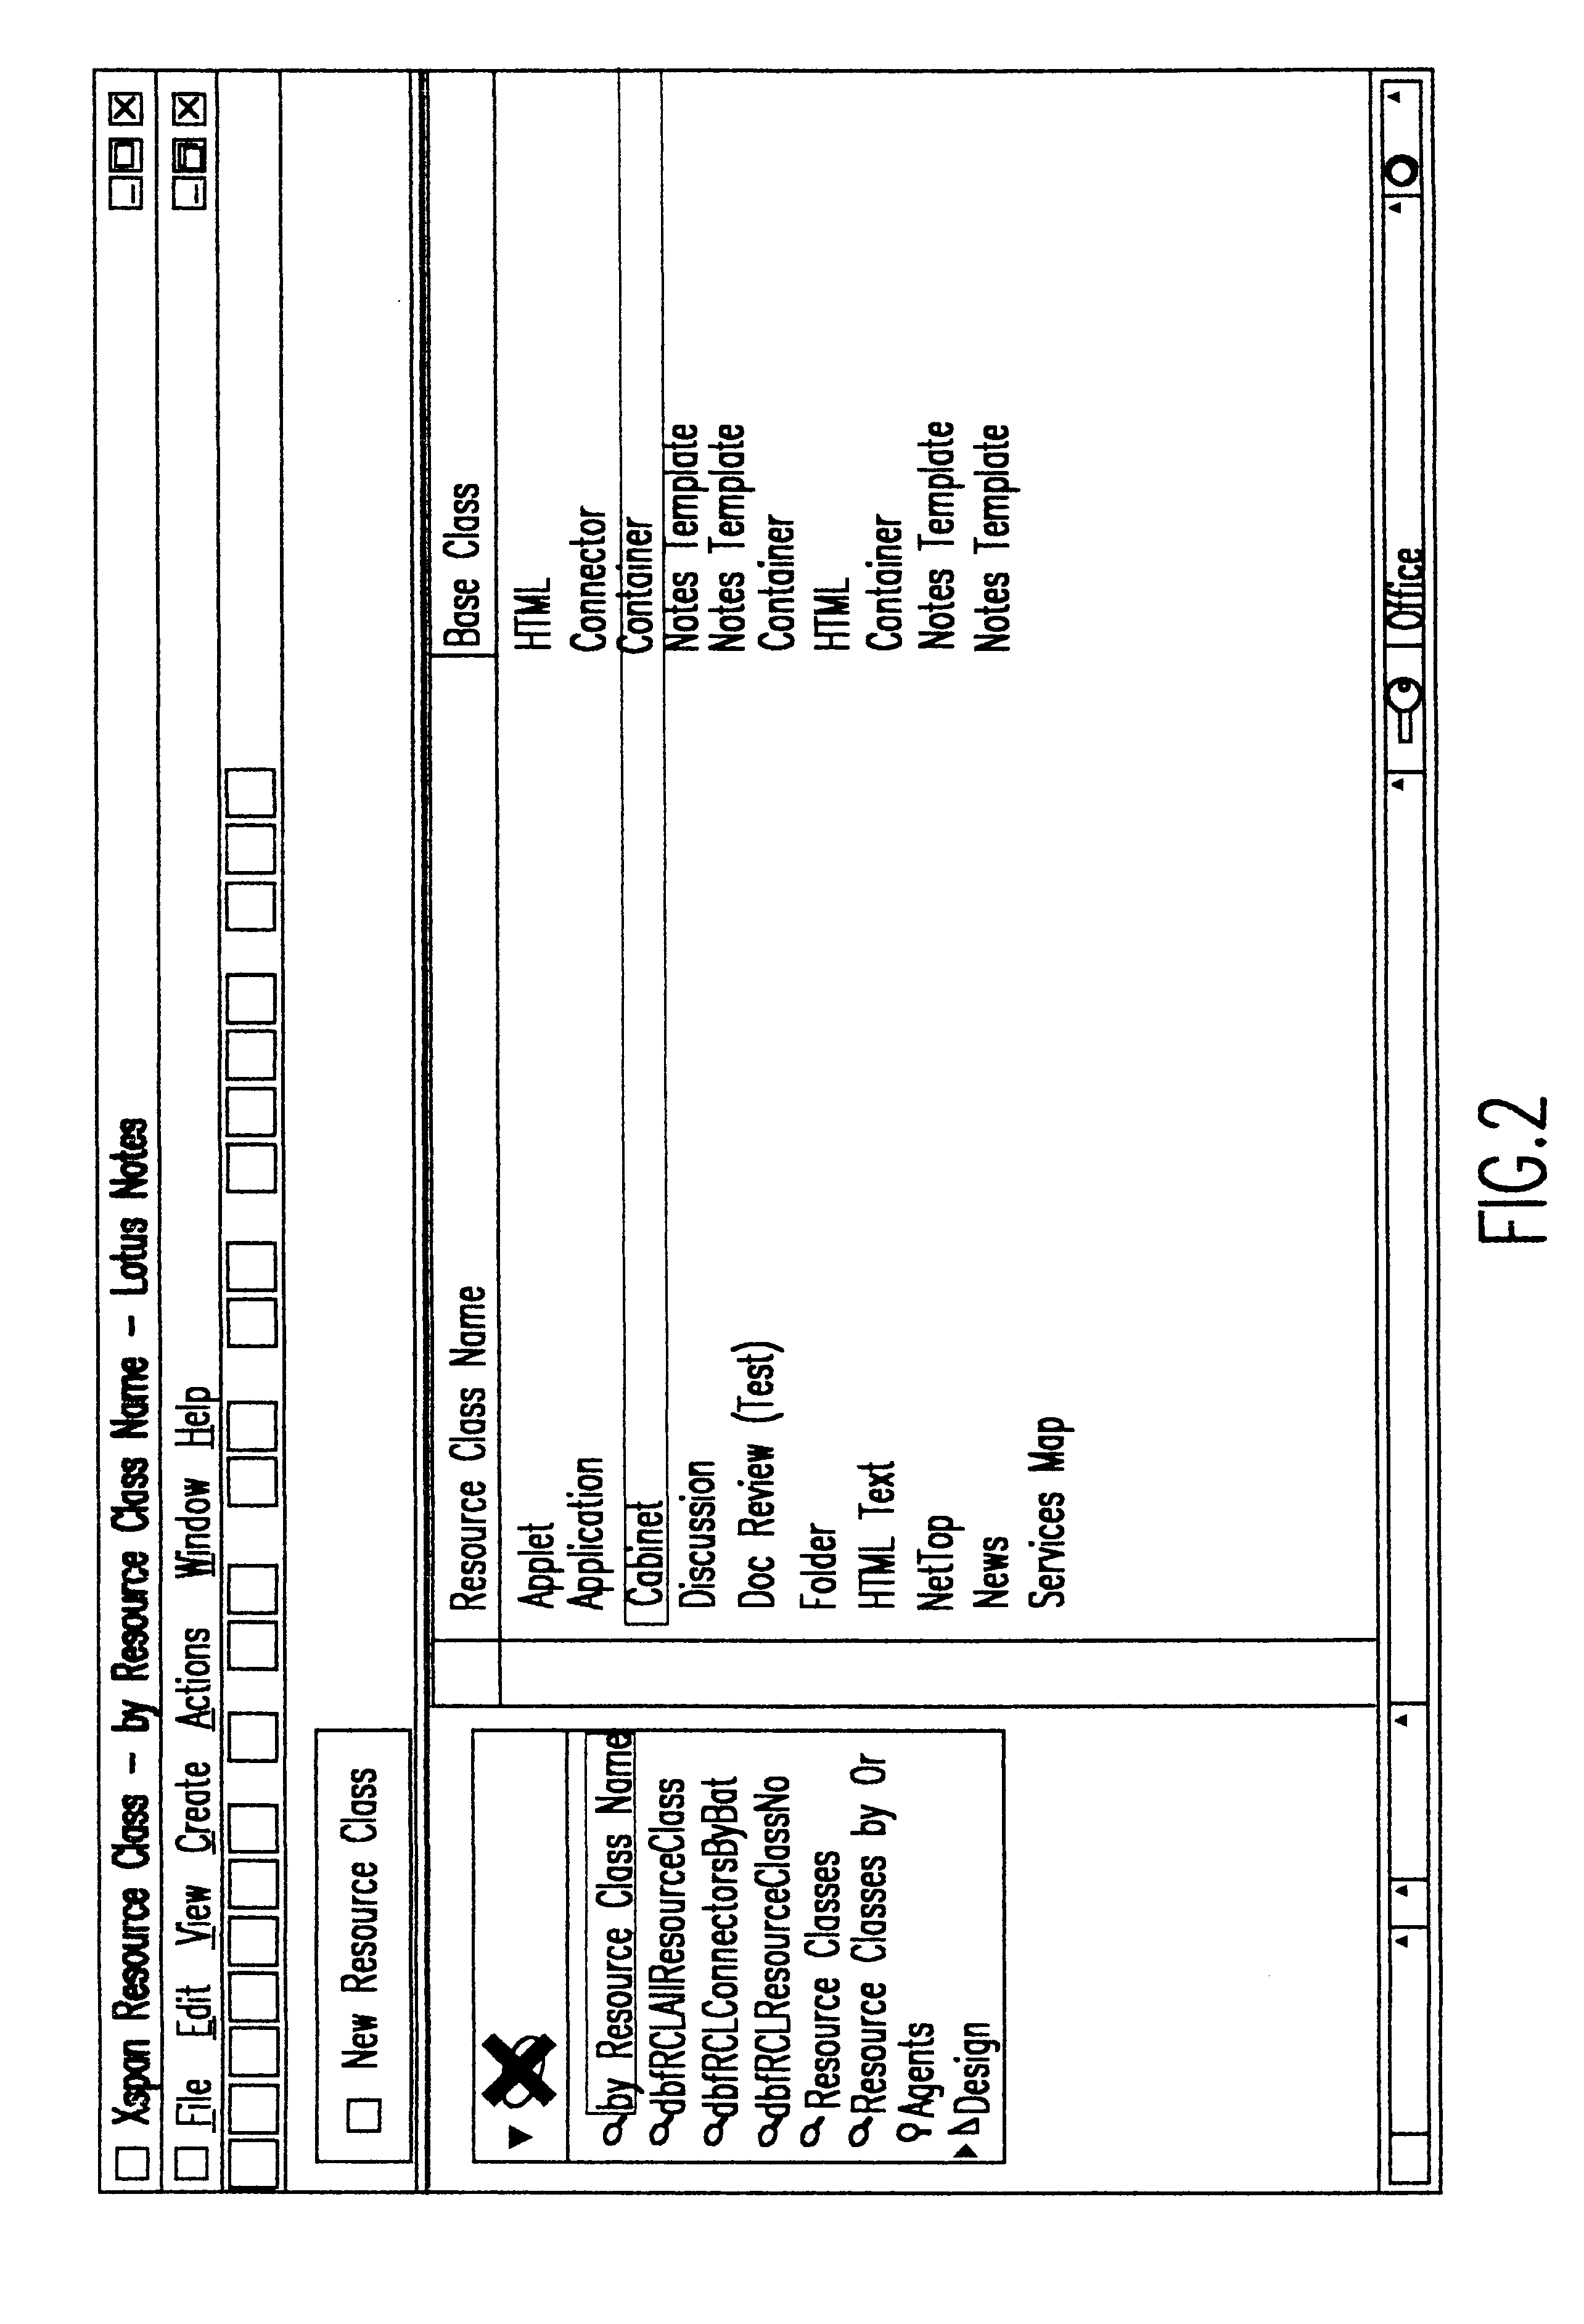 System and method to provide secure navigation to resources on the internet